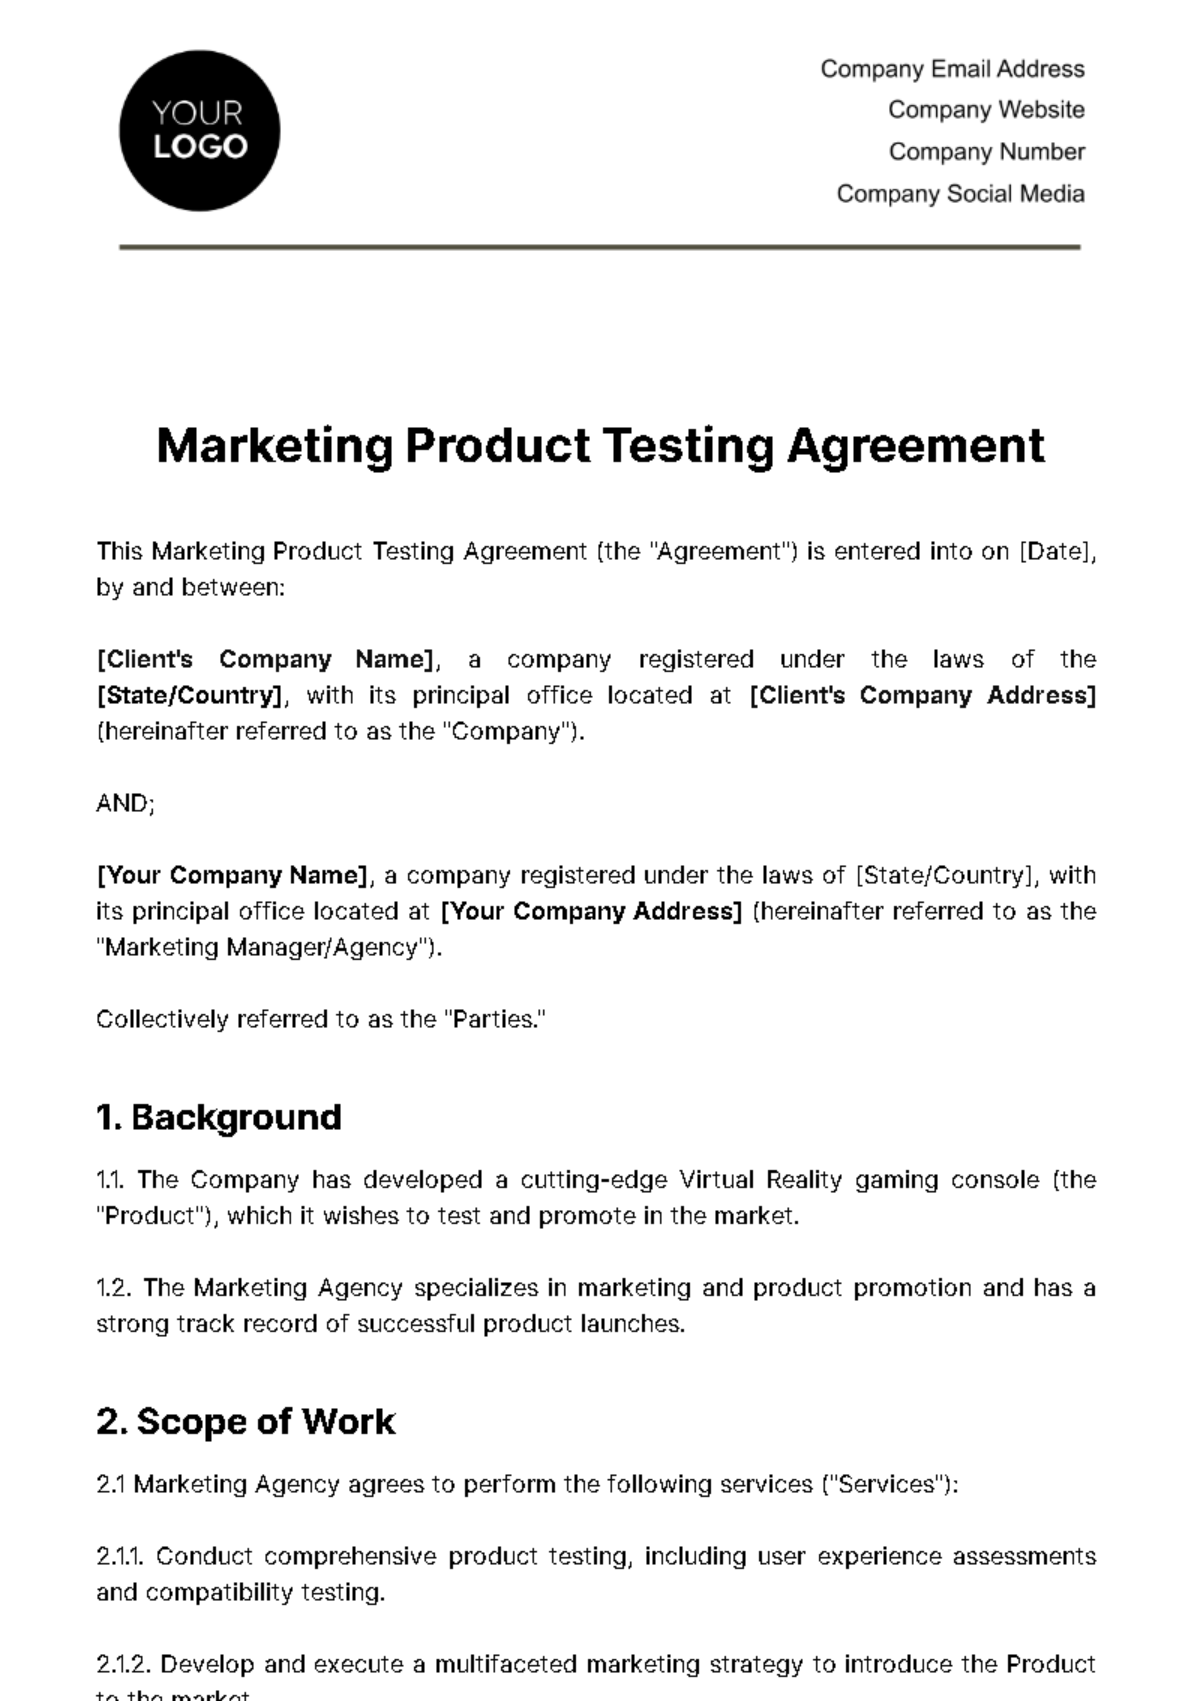 Free Marketing Product Testing Agreement Template